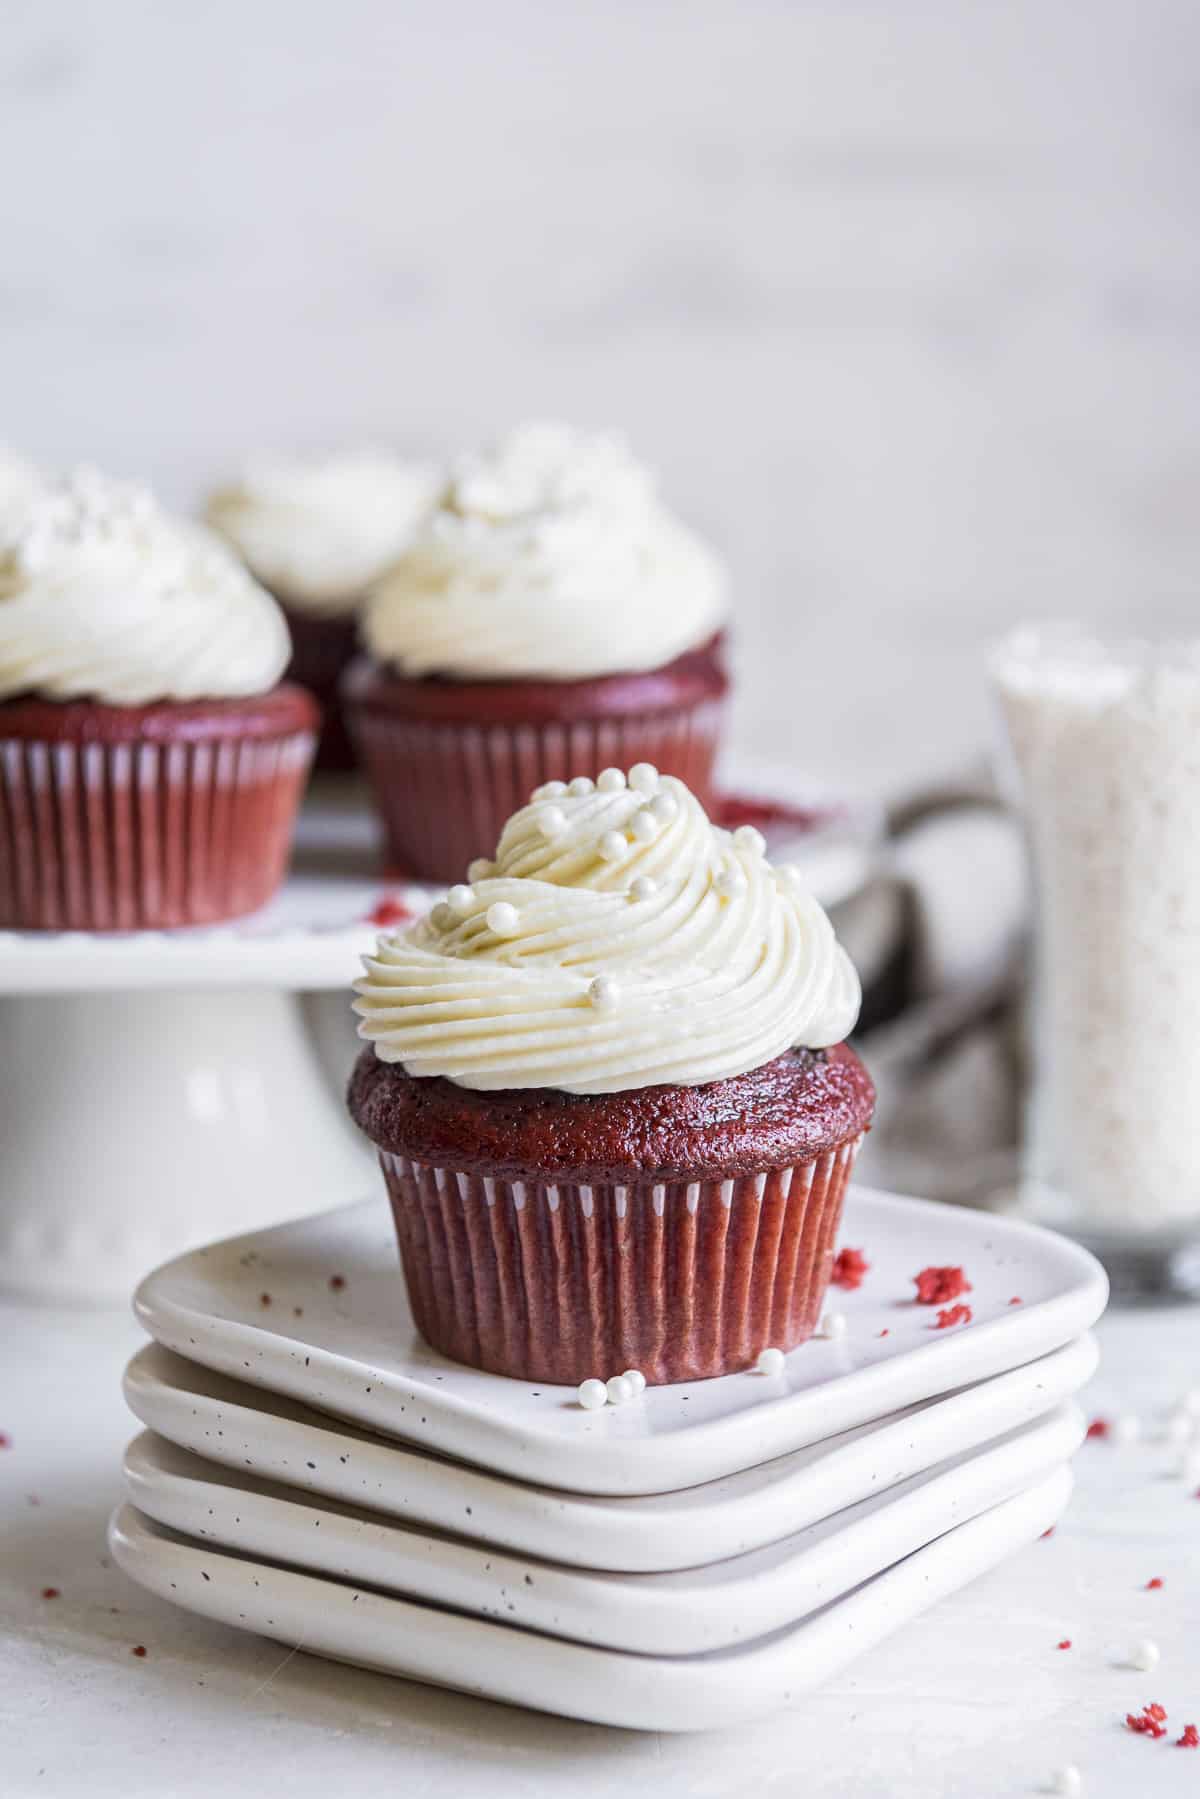 a red velvet cupcake on a stack of white plates with a cake stand full of more cupcakes in the background